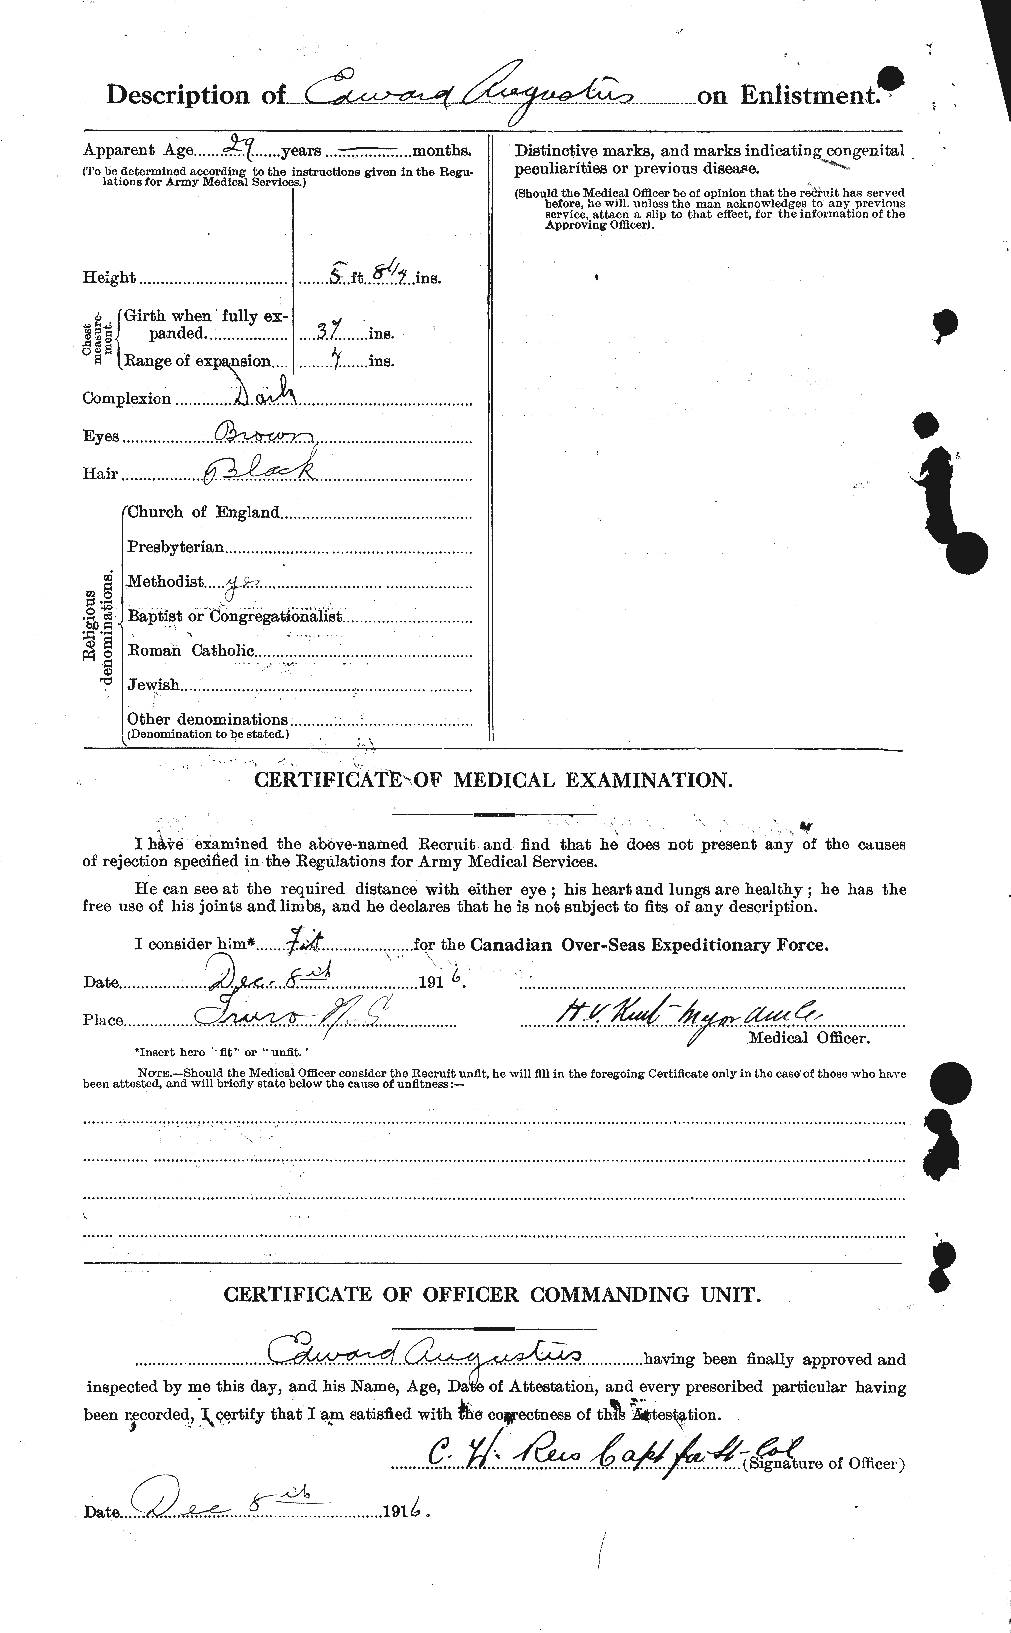 Personnel Records of the First World War - CEF 224295b